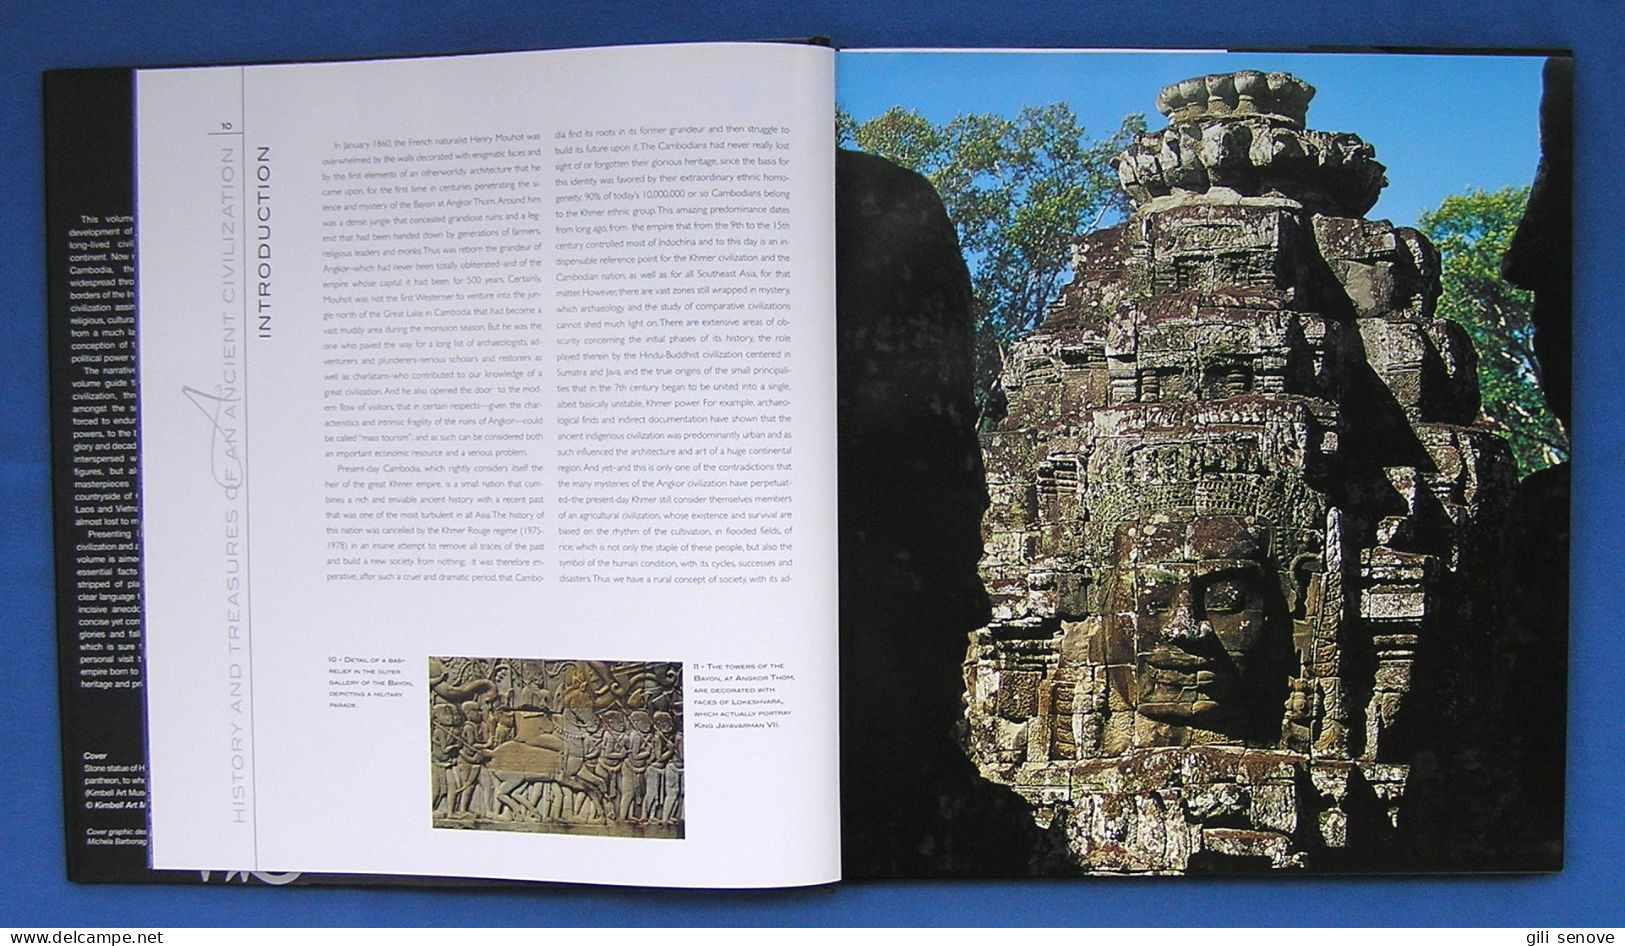 The Khmers: History And Treasures Of An Ancient Civilization 2007 - Schöne Künste